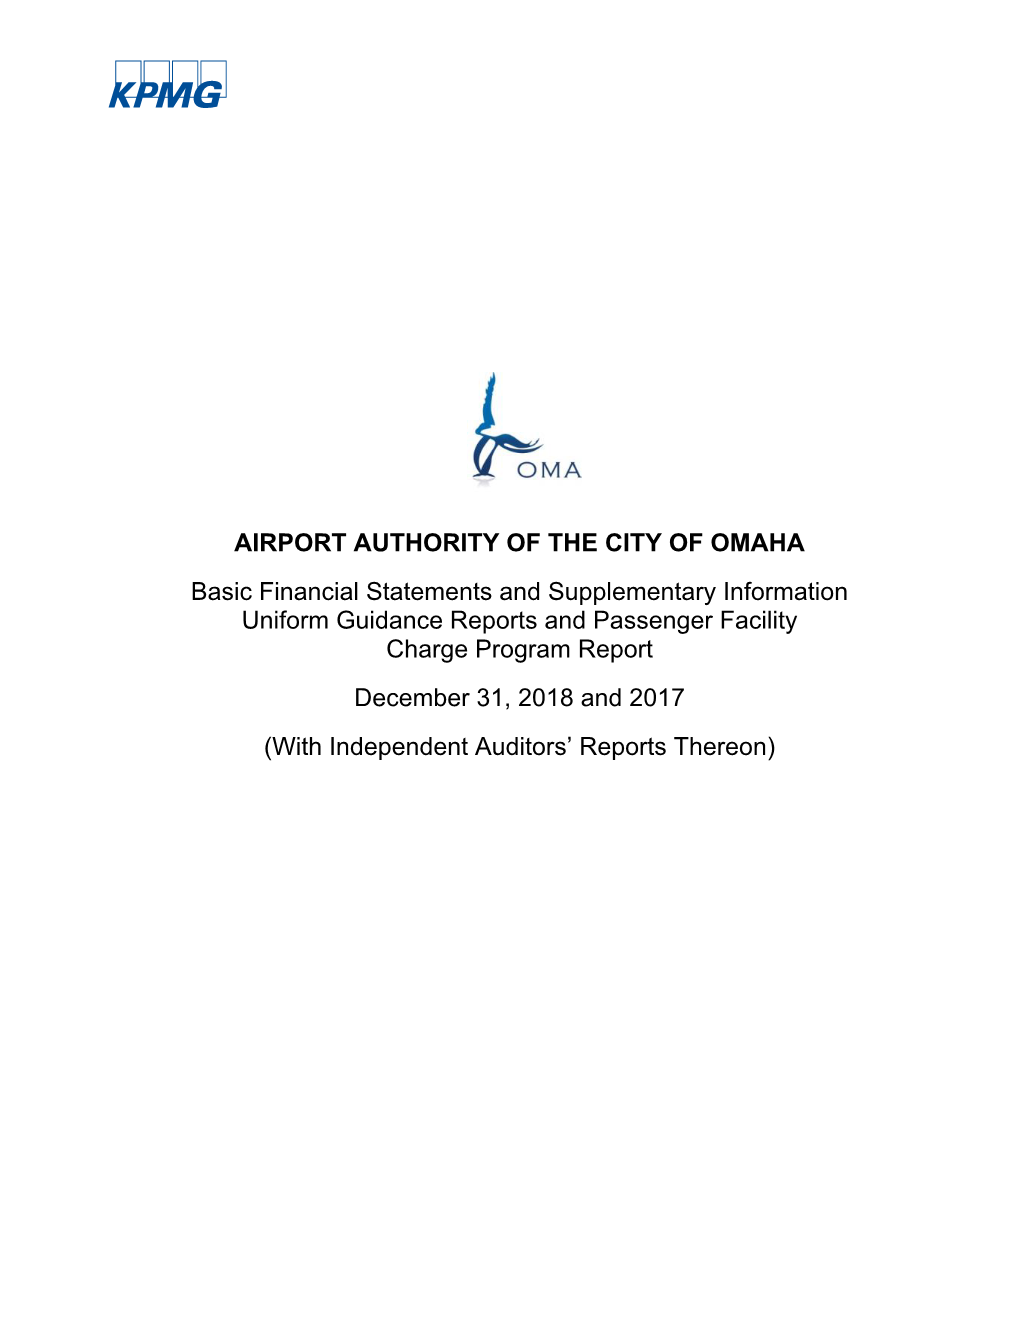 AIRPORT AUTHORITY of the CITY of OMAHA Basic Financial